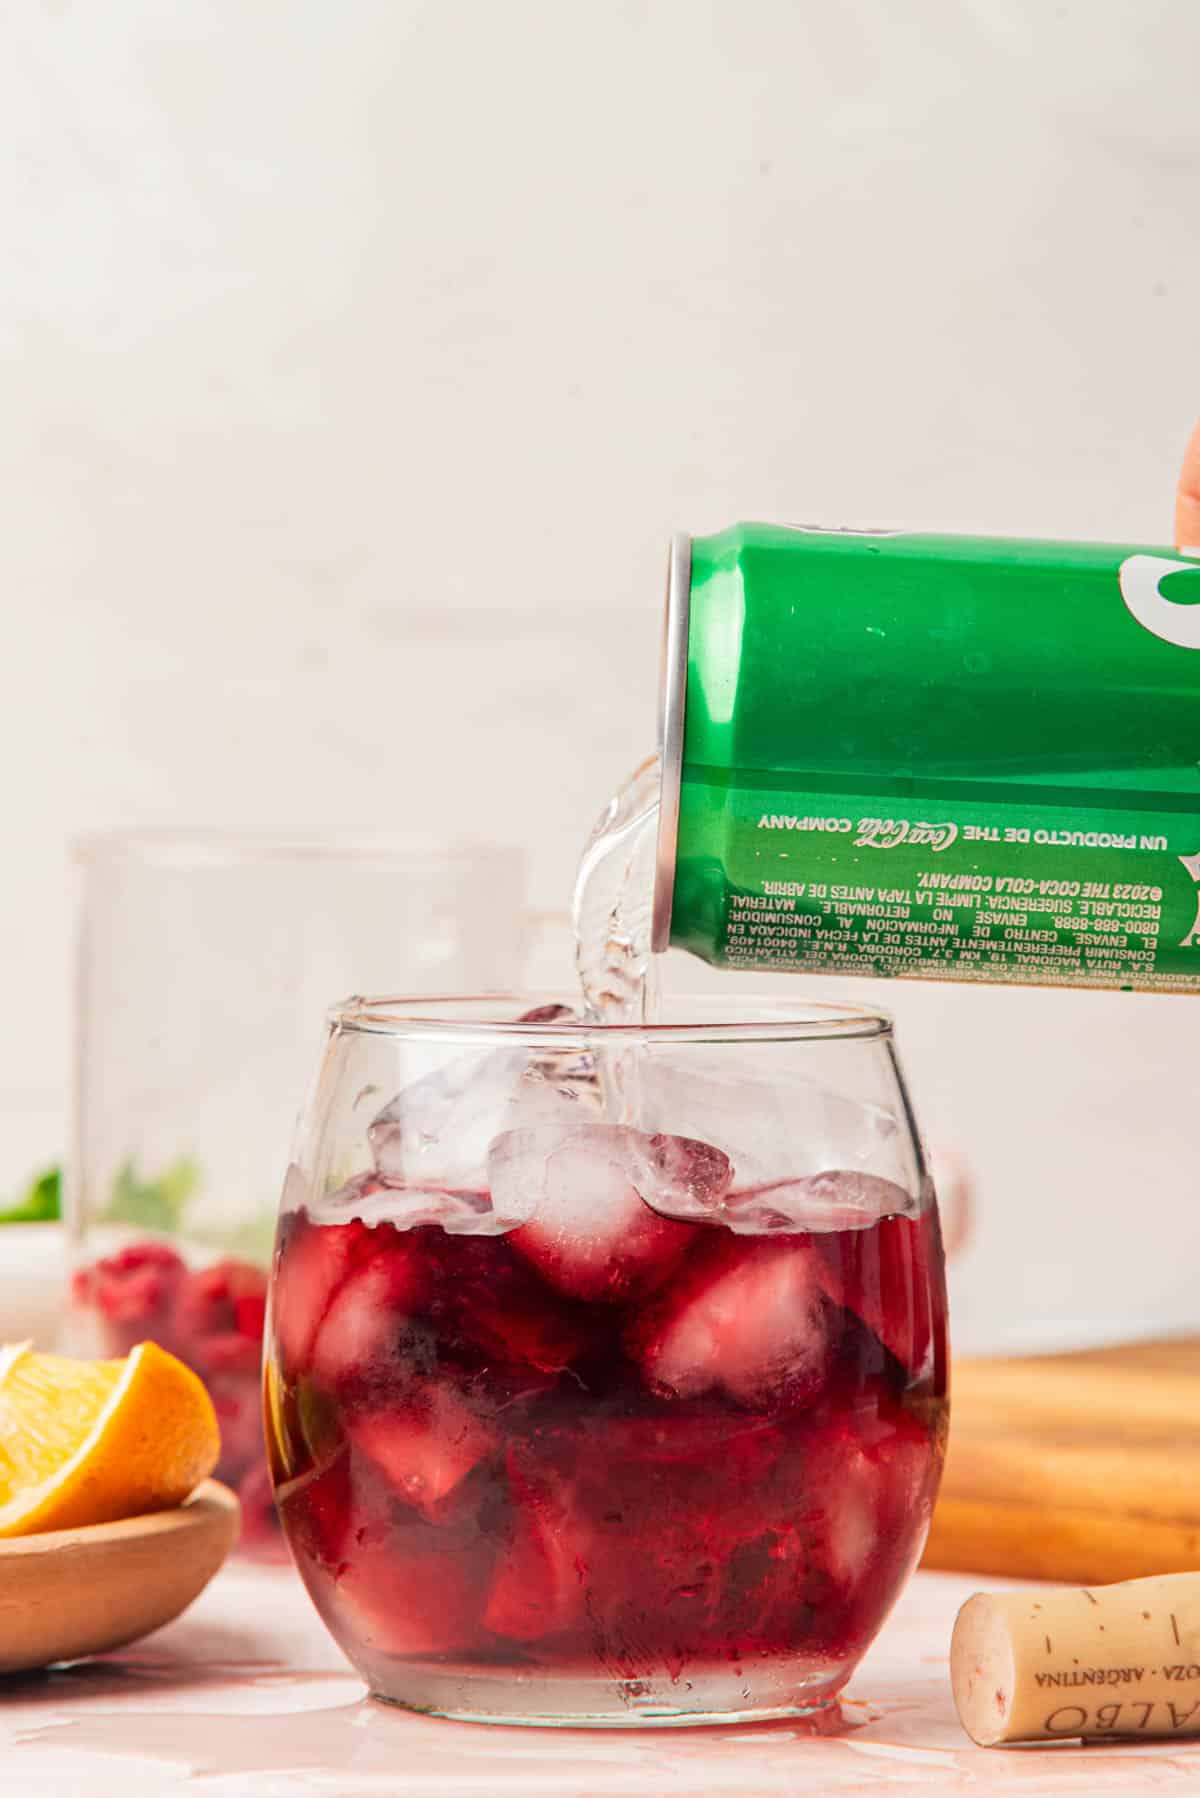 Adding Sprite to red wine over ice in a cocktail glass with fruit and can of Sprite in background.